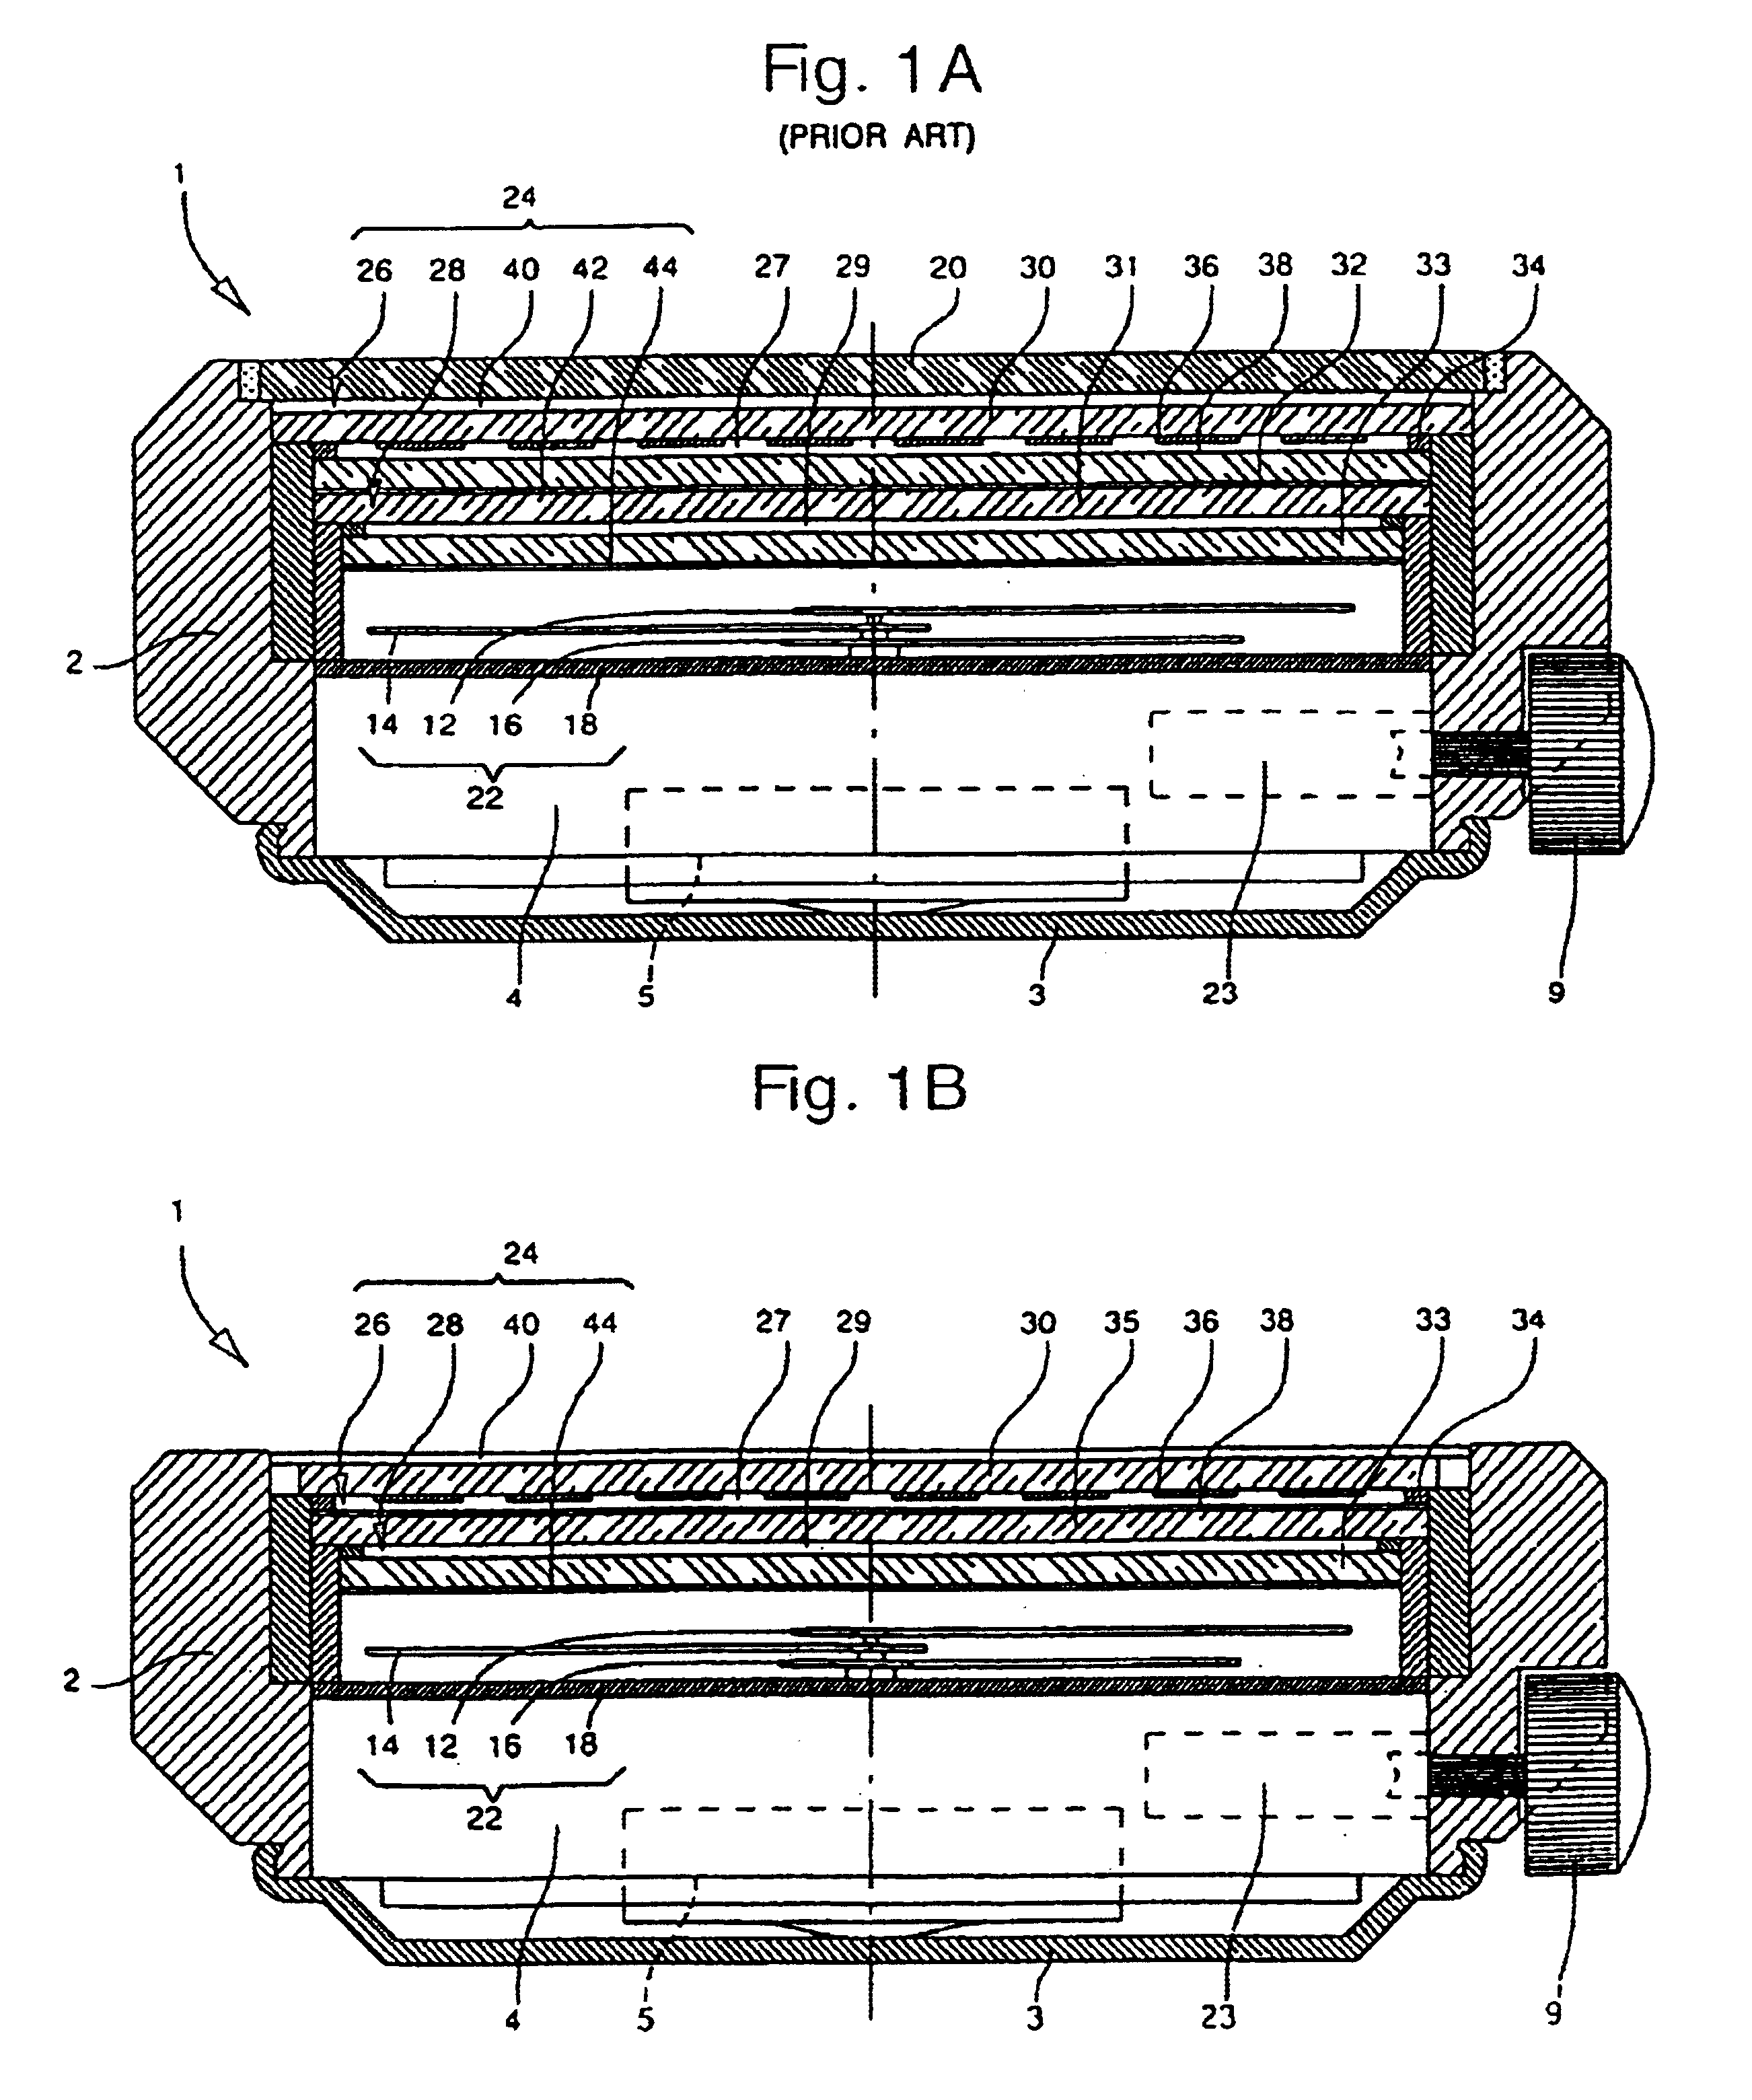 Display assembly with contrast inversion including two superposed display devices